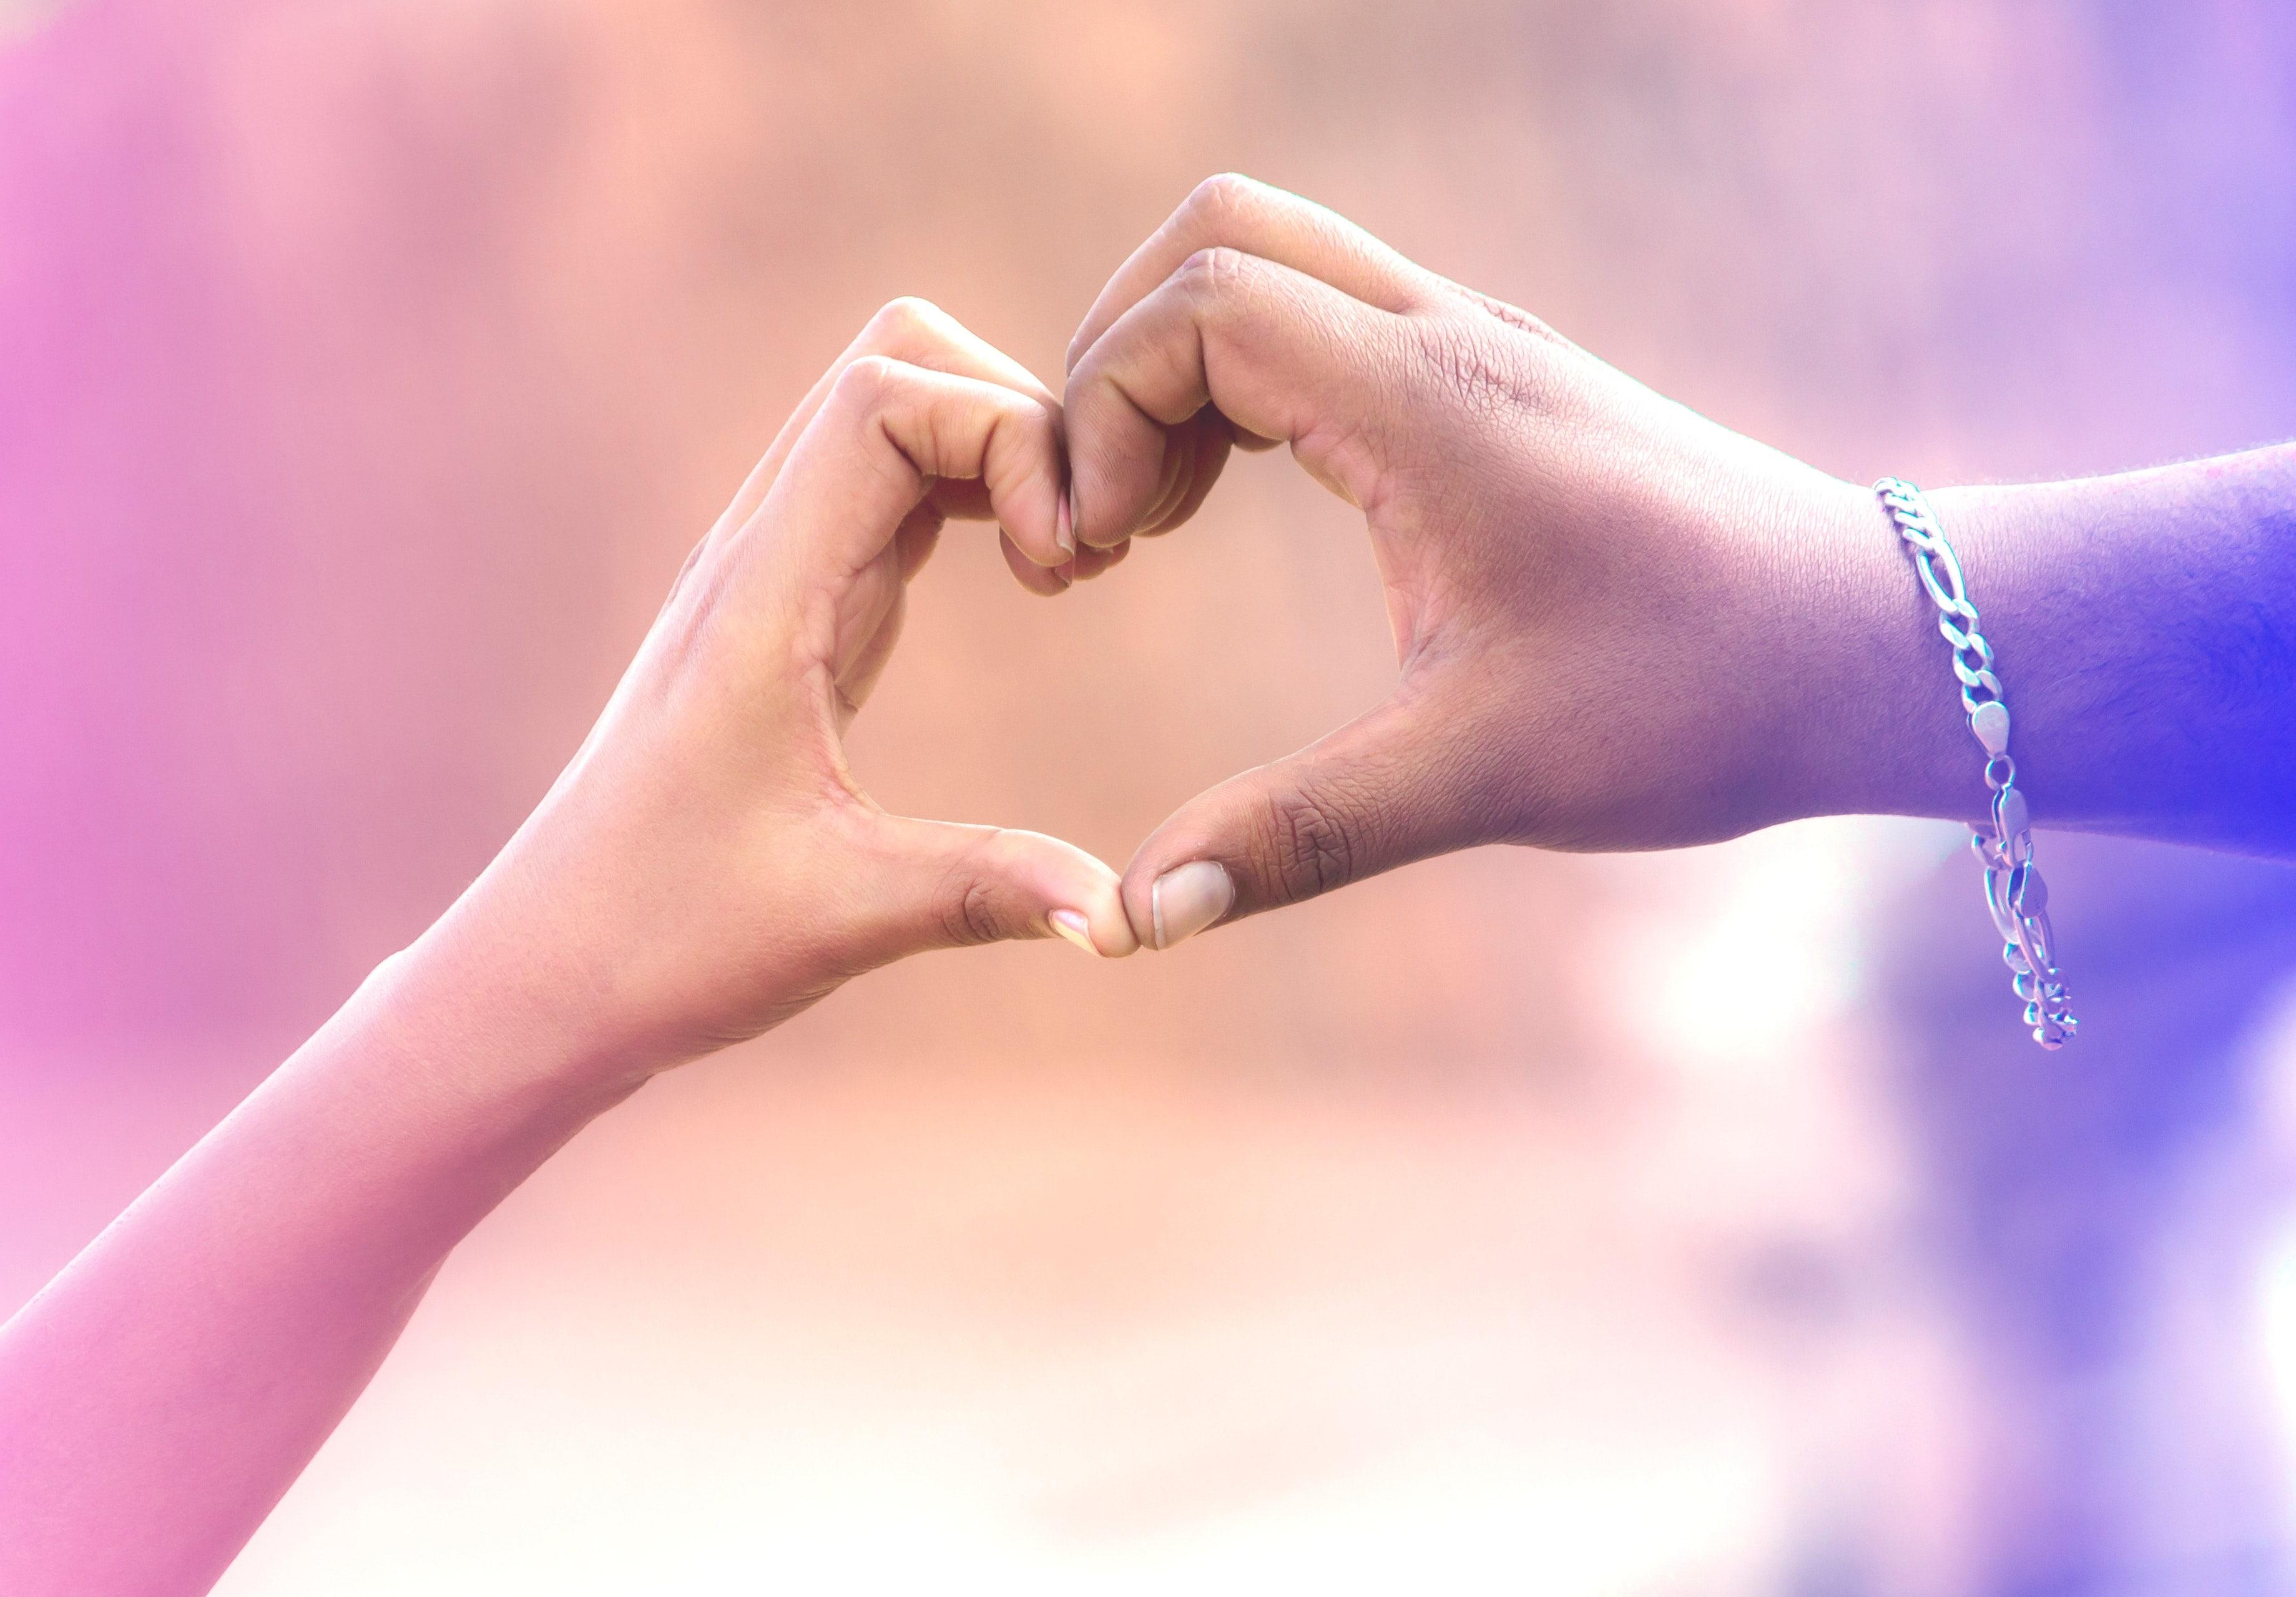 Boy And Girl Making Heart With Hands Wallpaper In HD 4K